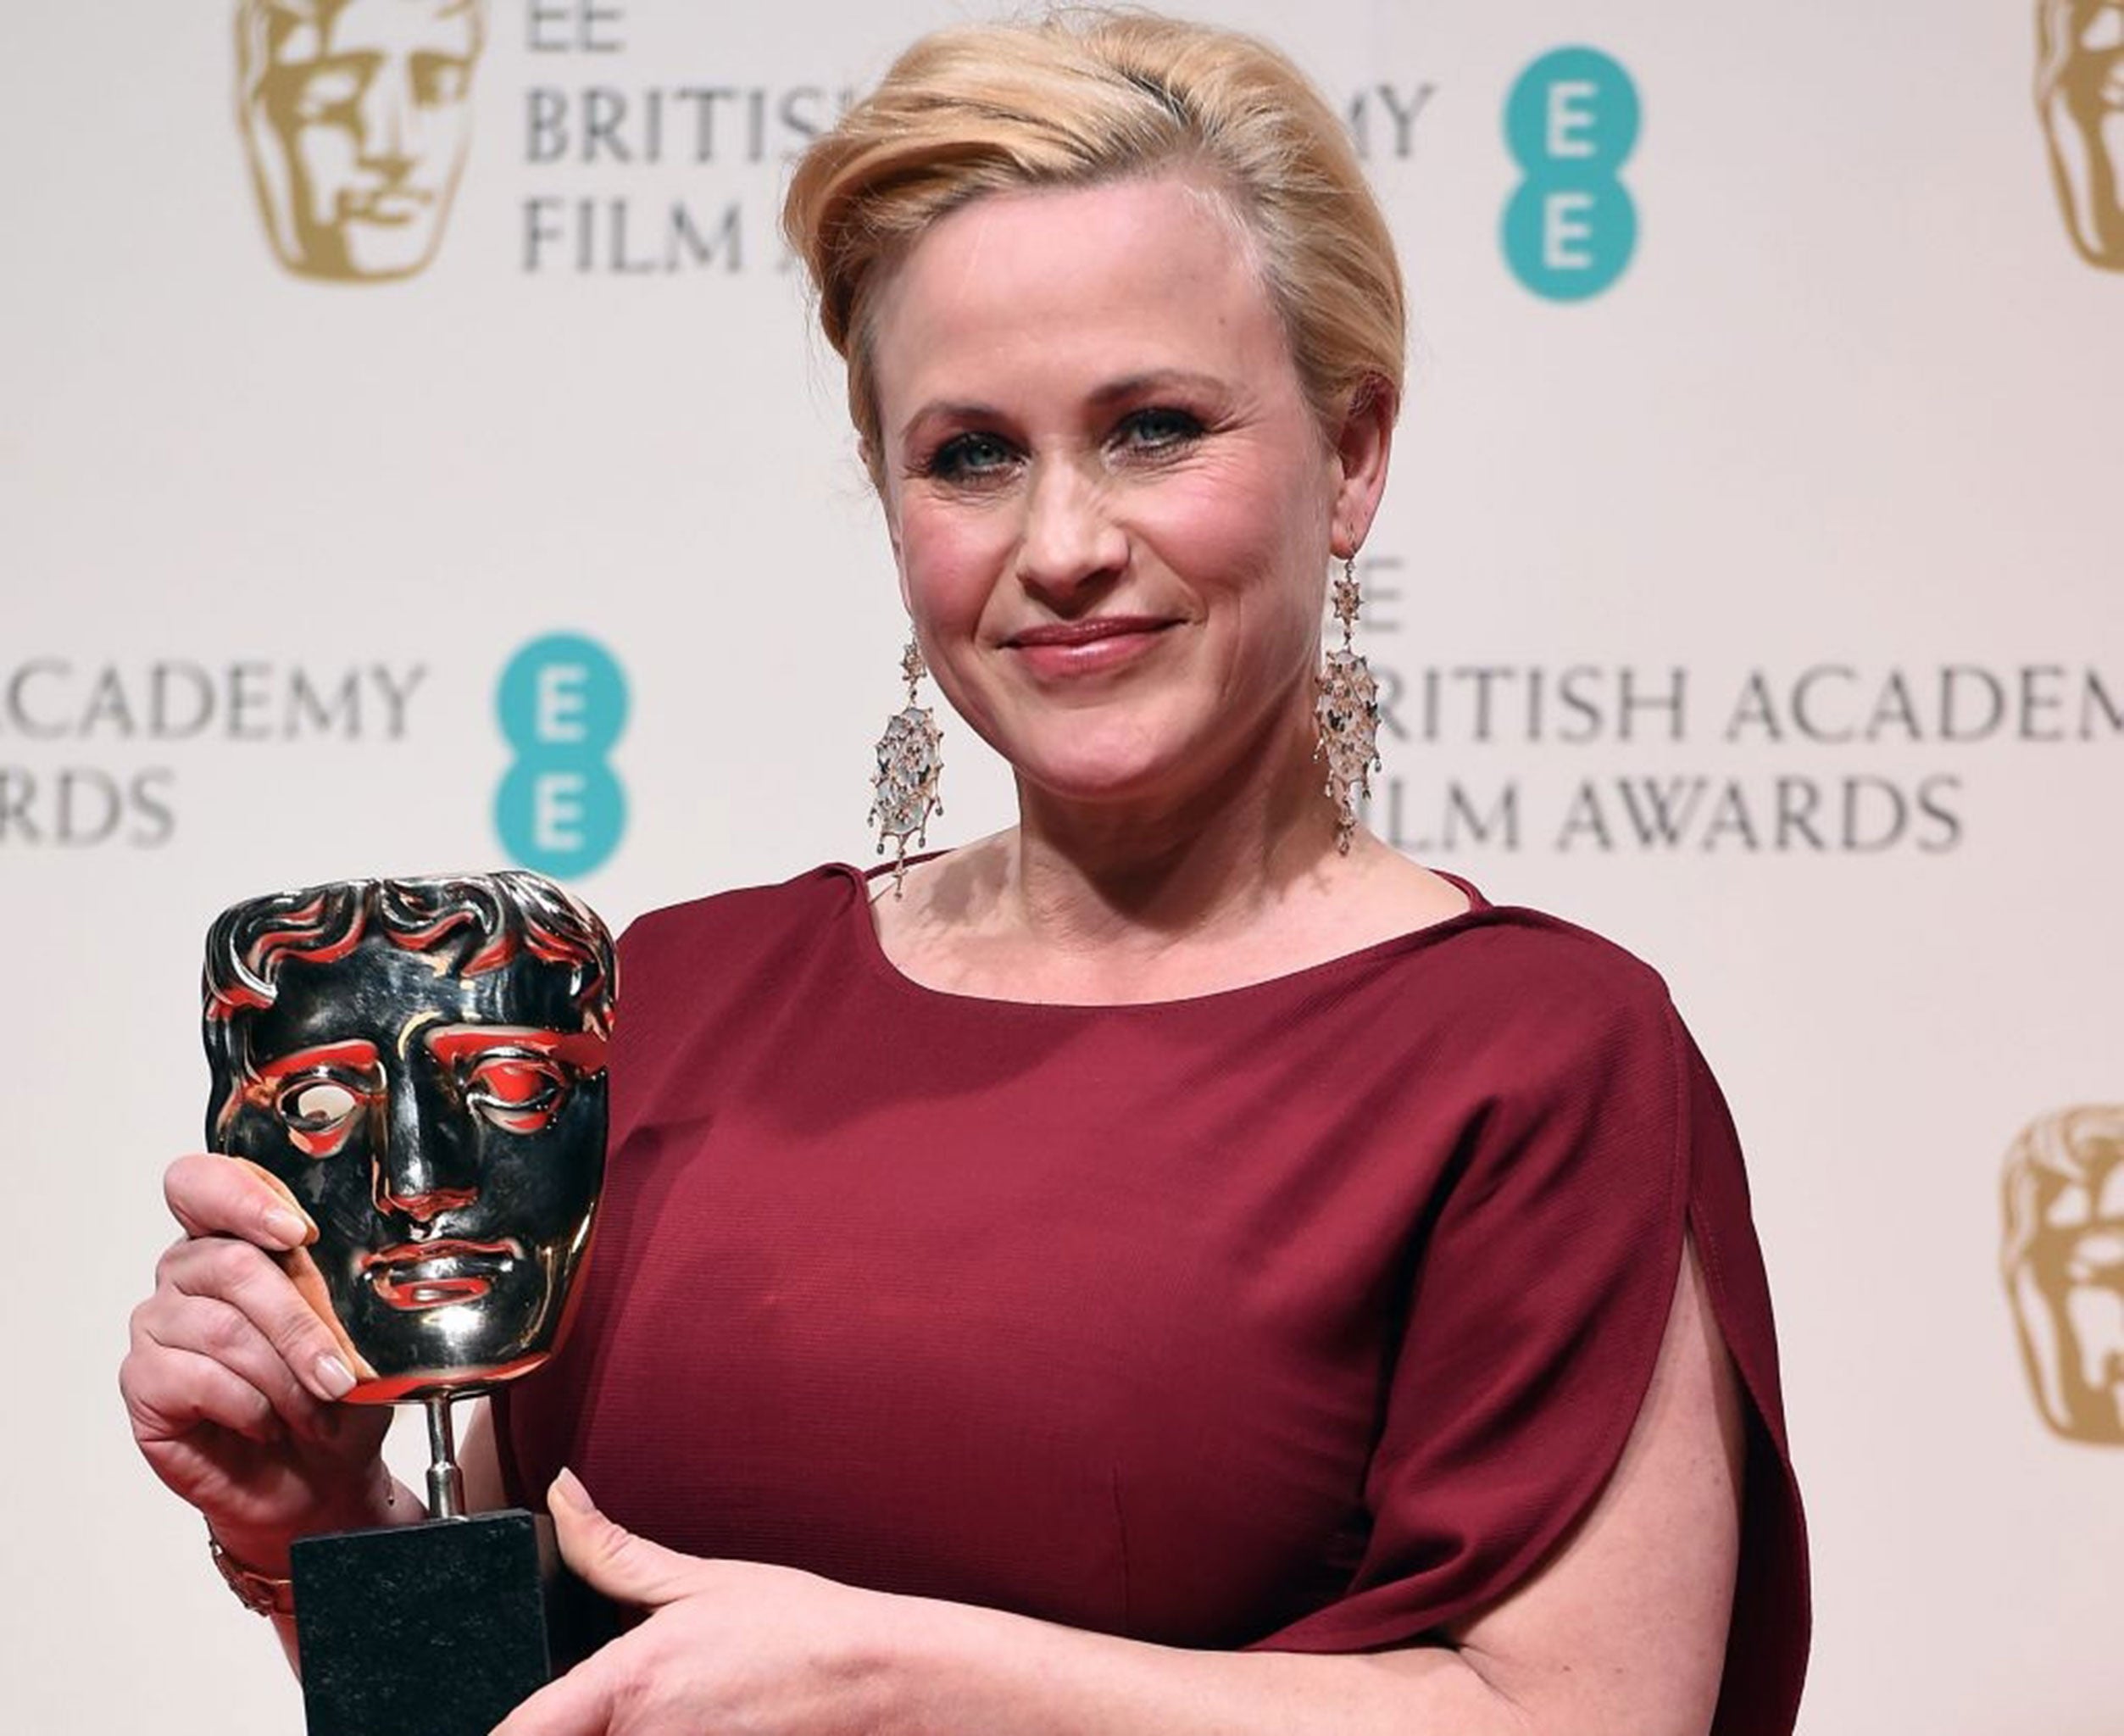 US actress Patricia Arquette poses in the Baftas press room after winning the Best Supporting Actress award